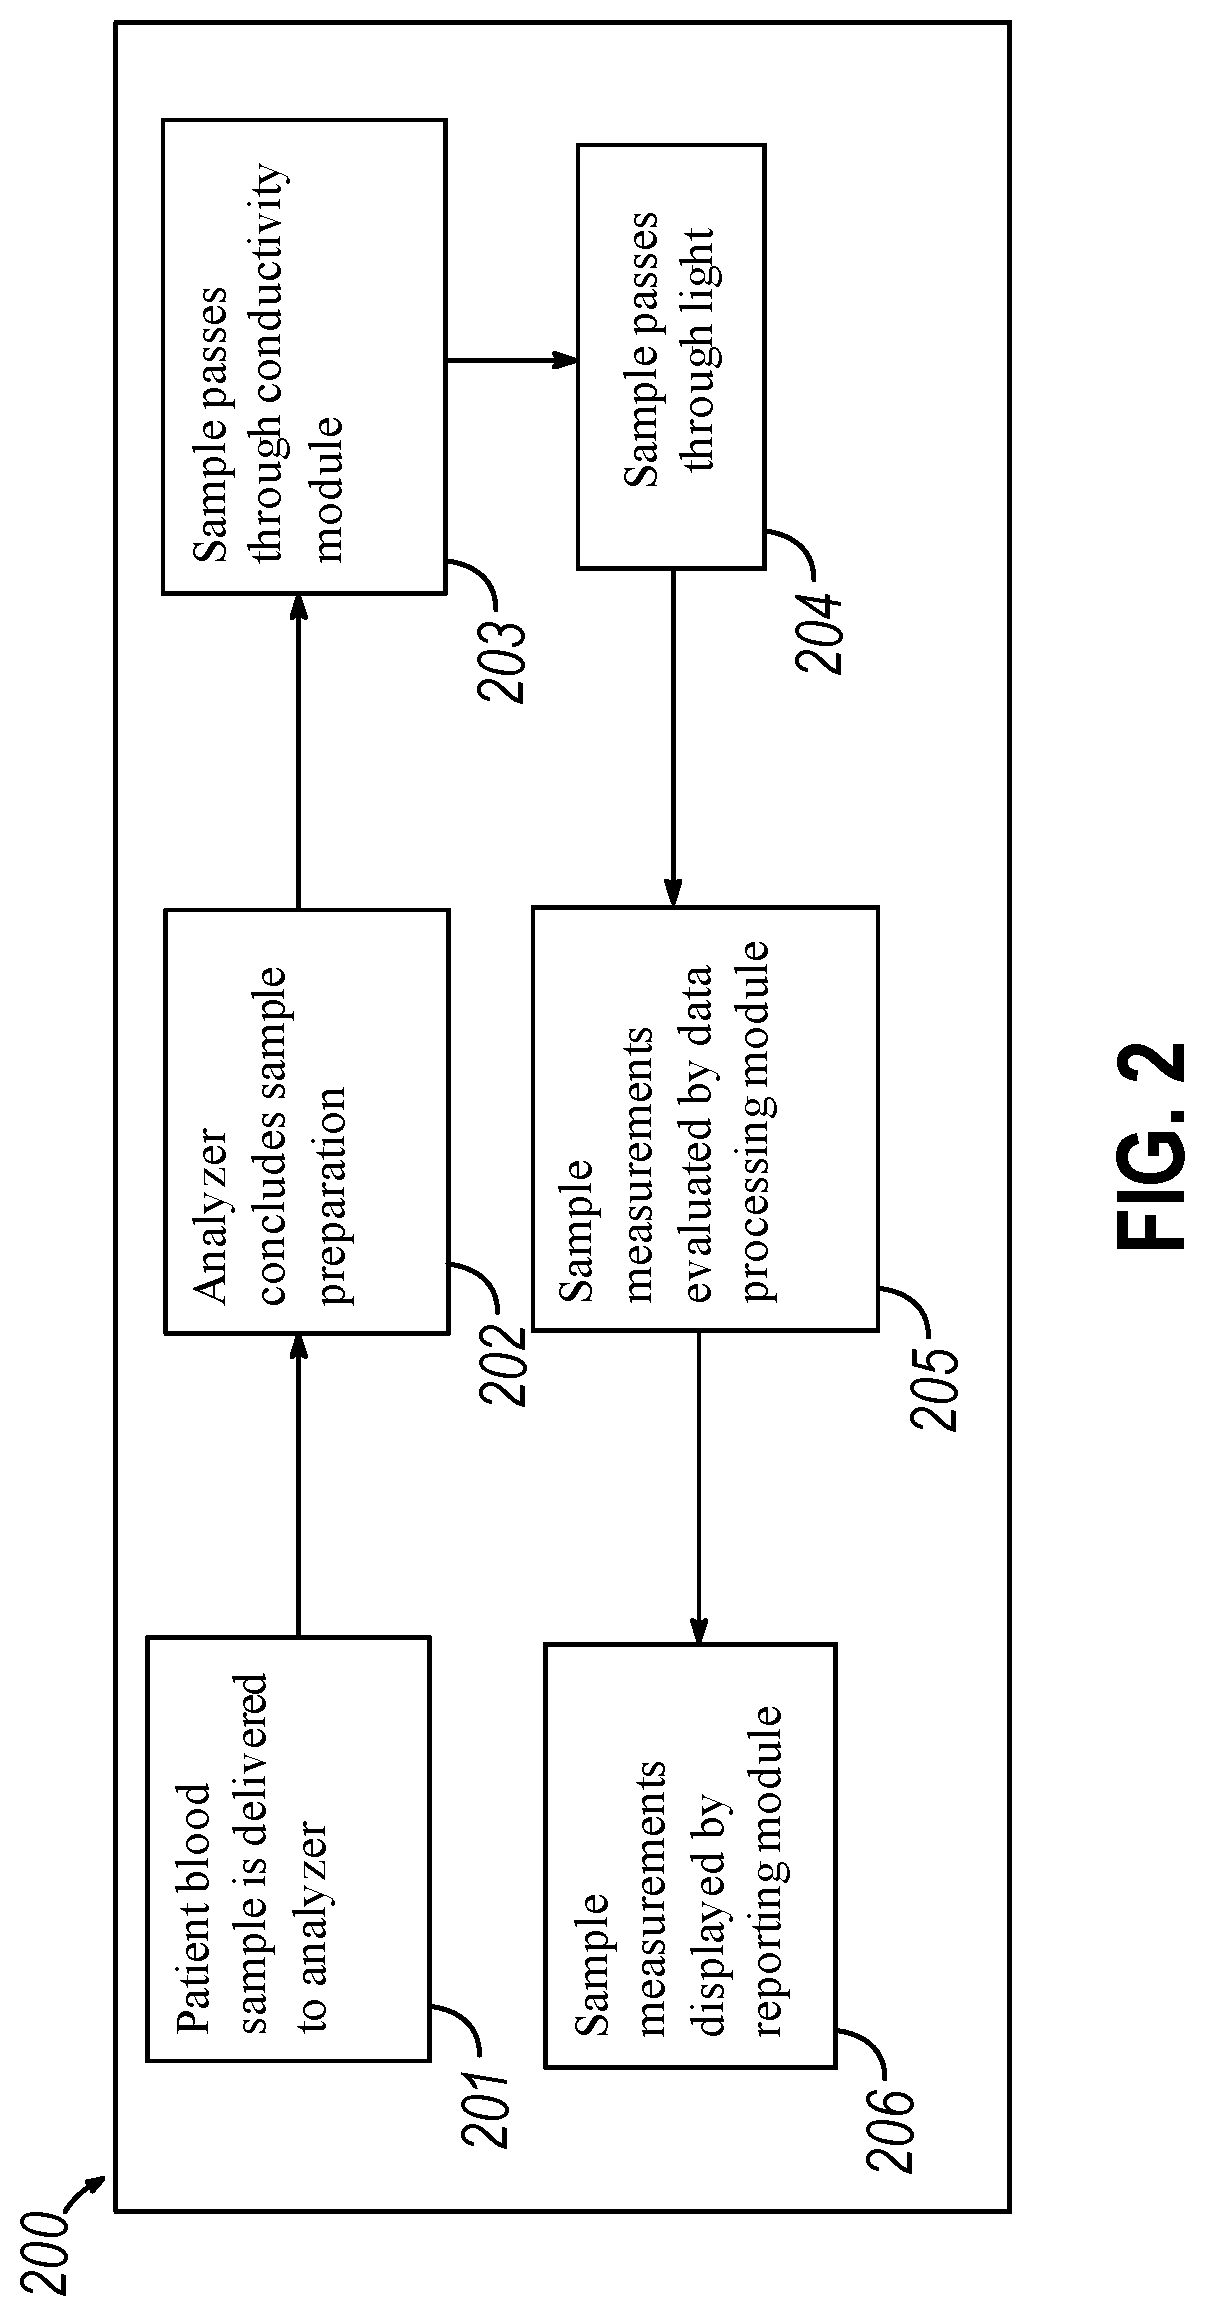 Method of detecting sepsis using vital signs, including systolic blood pressure, hematology parameters, and combinations thereof